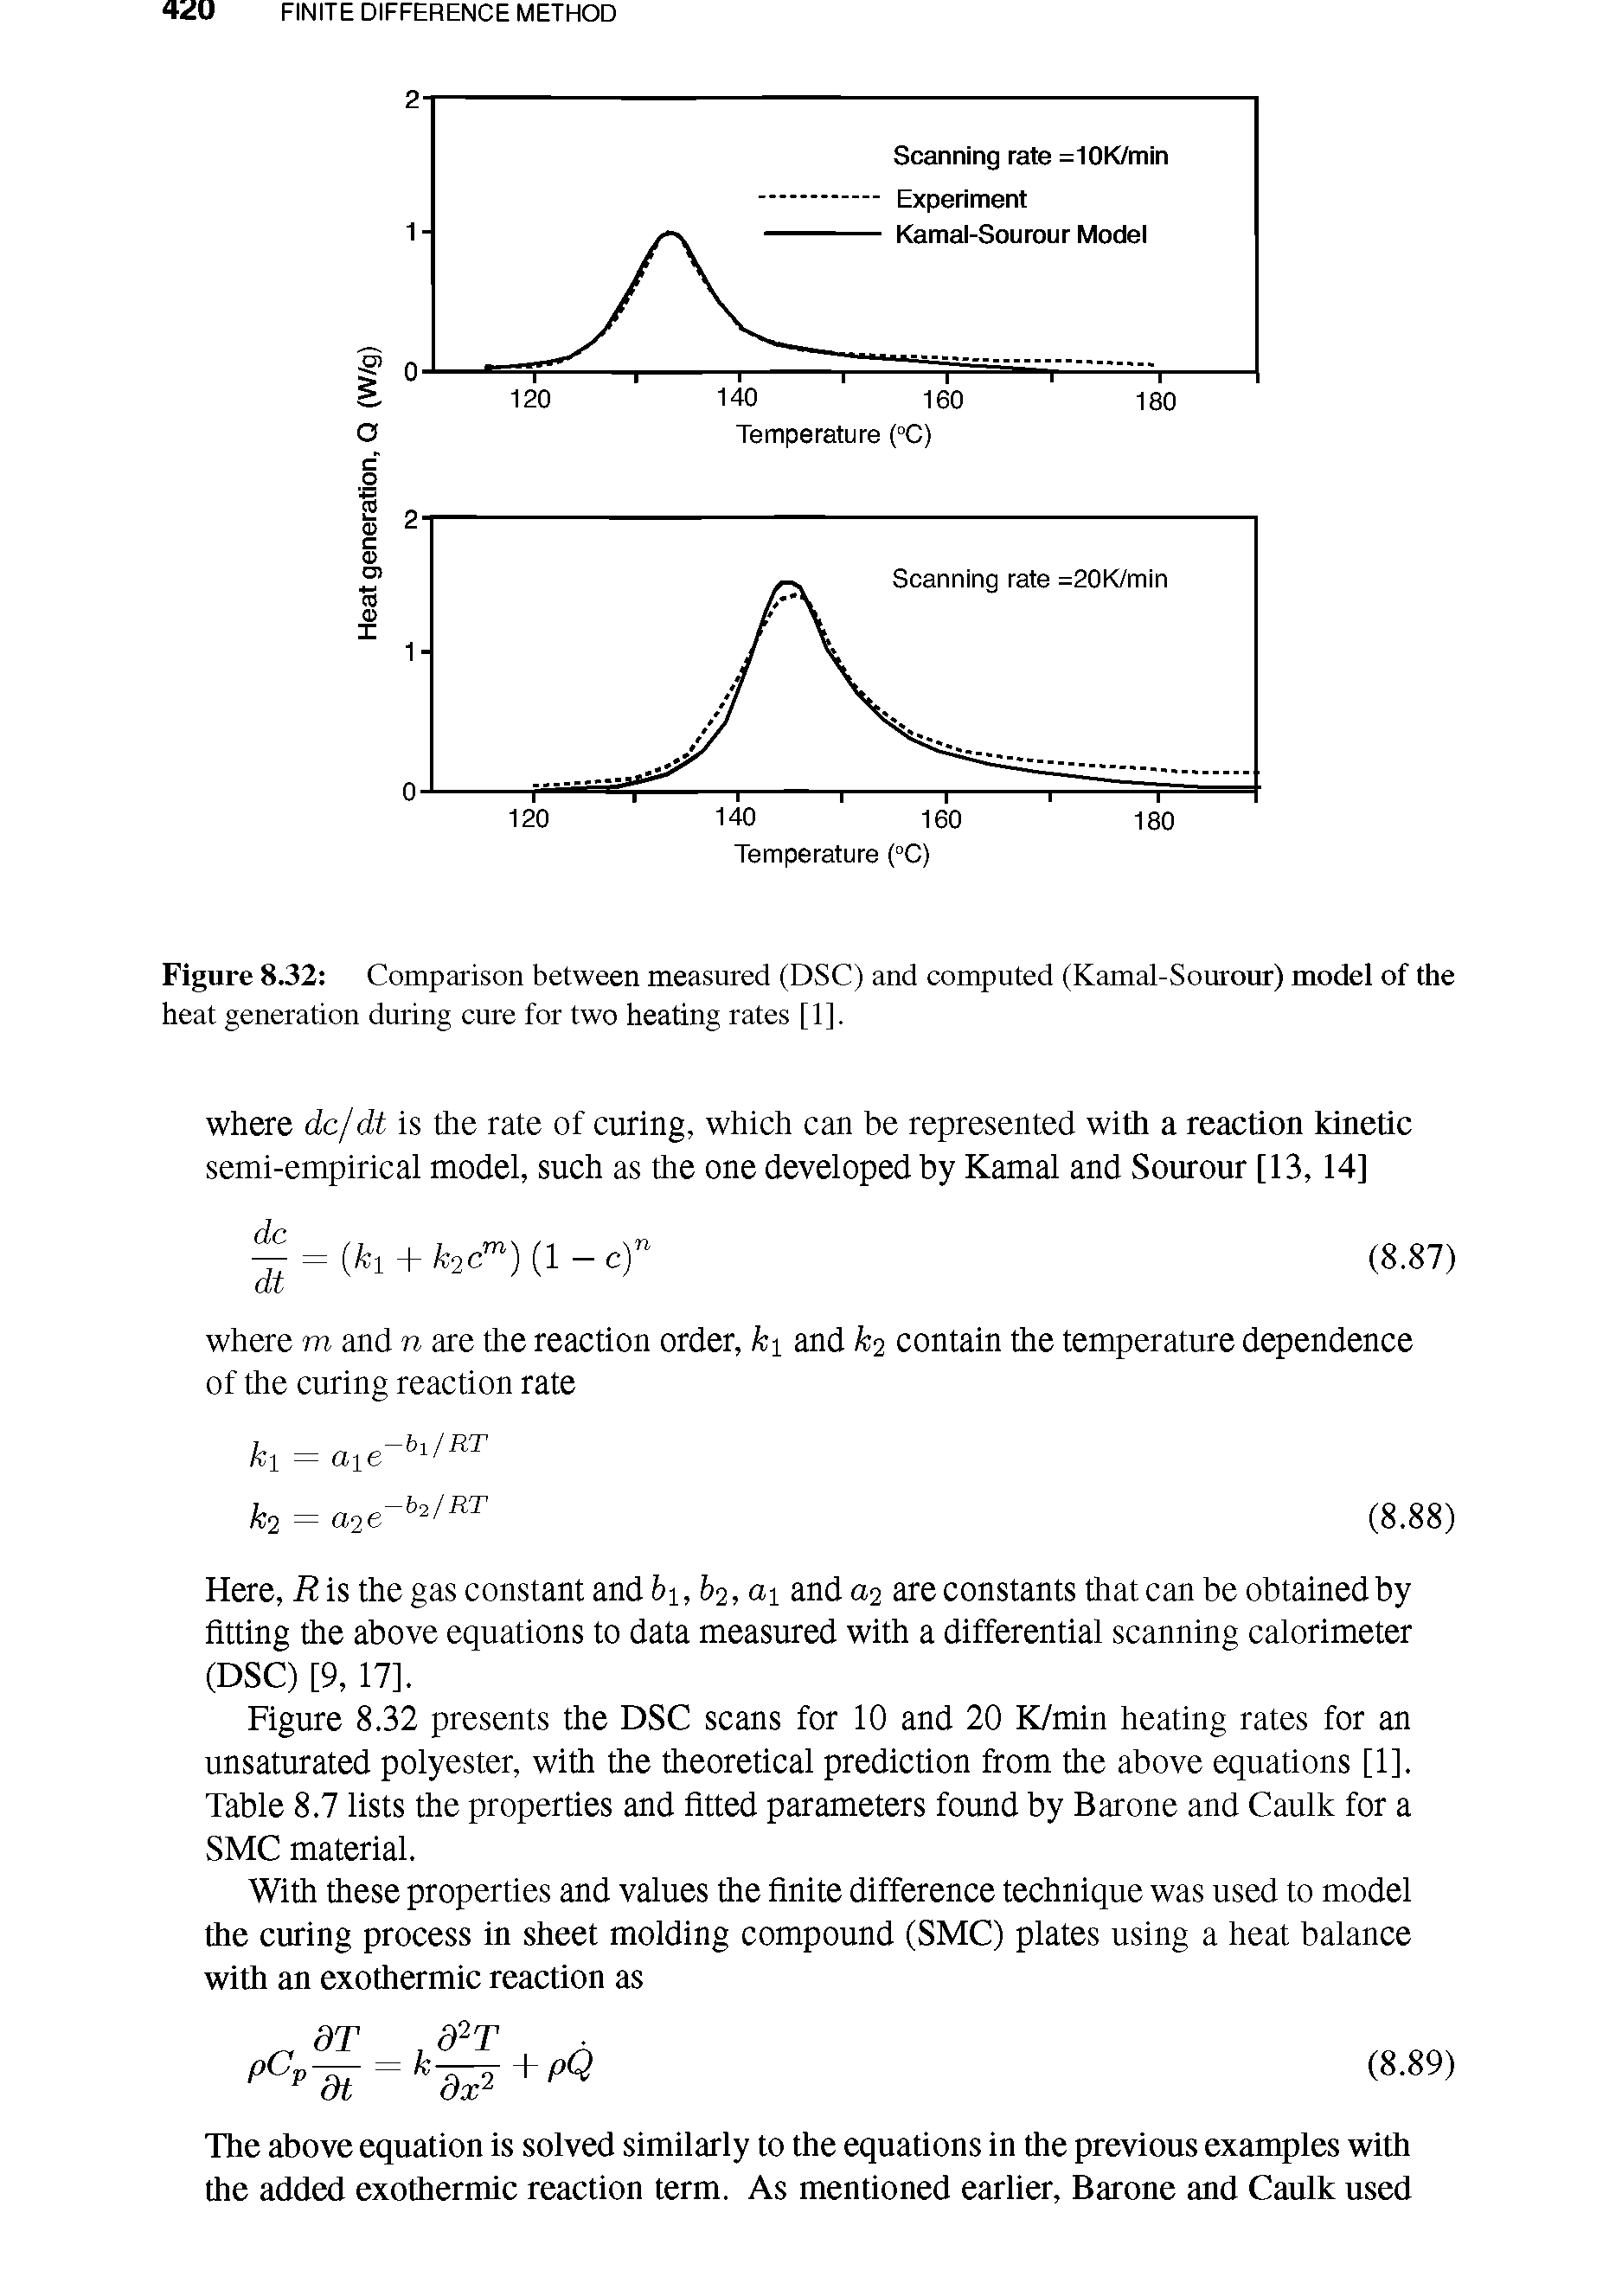 Figure 8.32 Comparison between measured (DSC) and computed (Kamal-Sourour) model of the heat generation during cure for two heating rates [1].